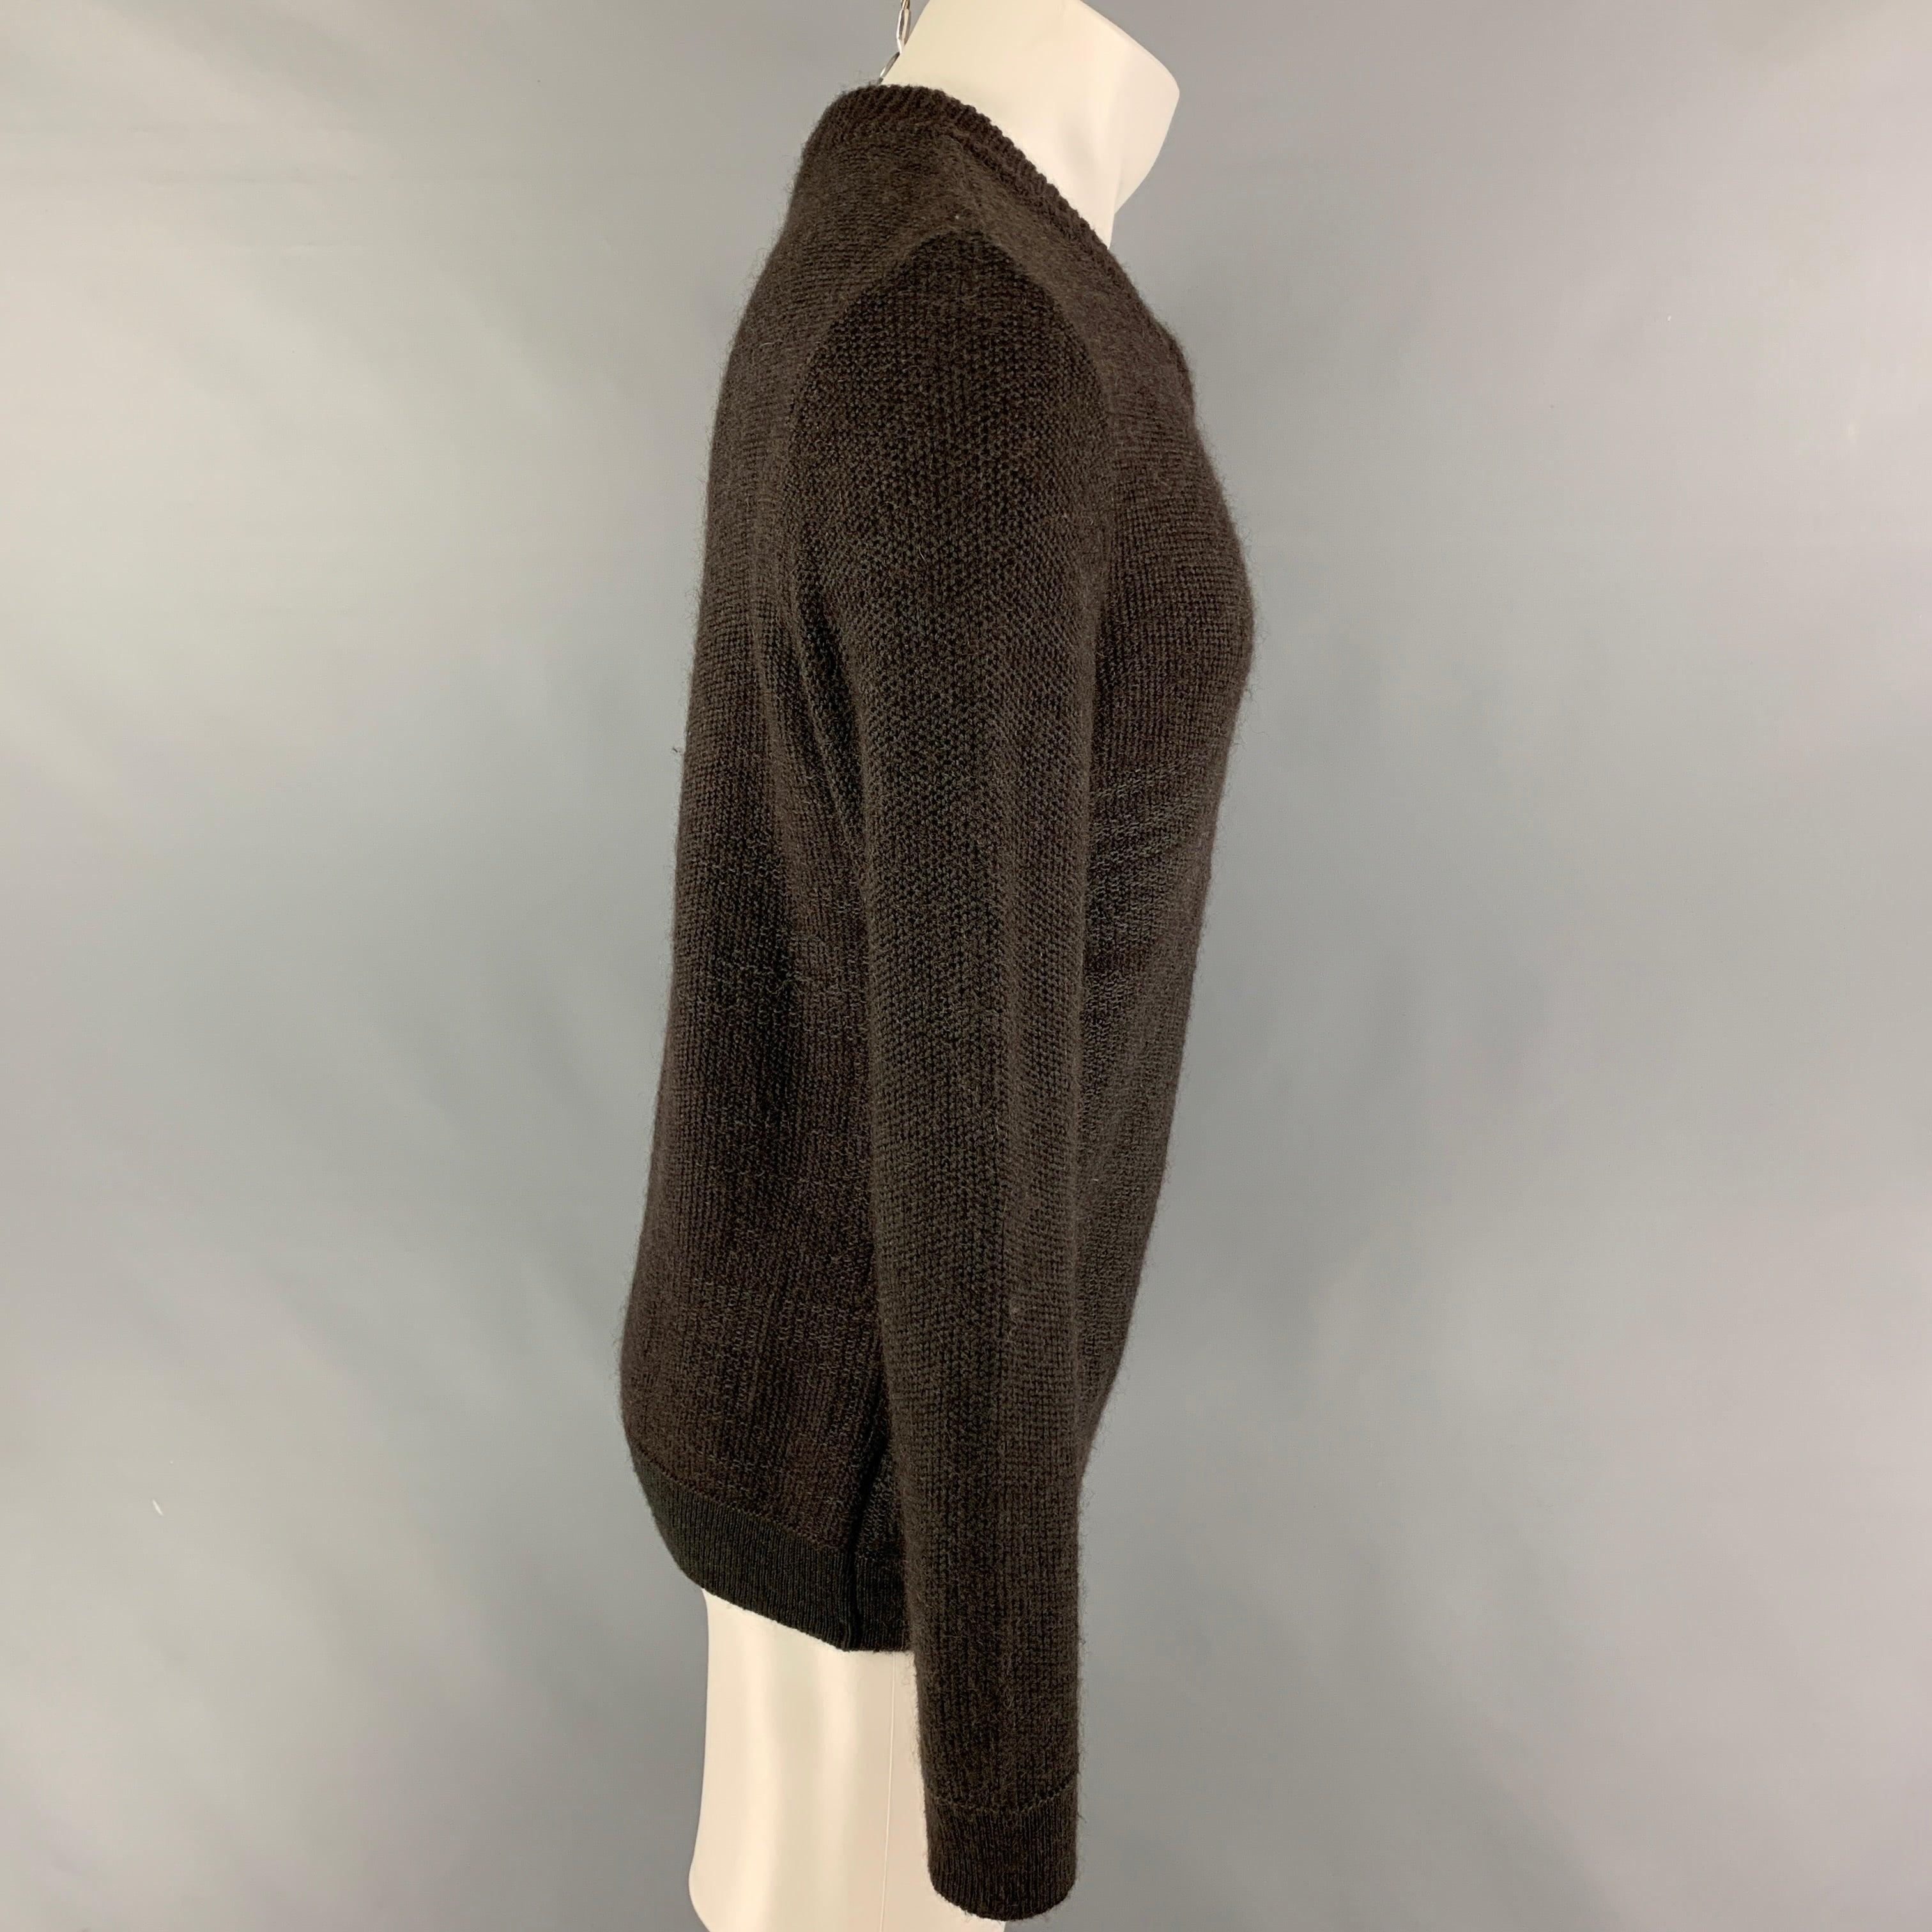 STEPHAN SCHNEIDER sweater comes in a brown & grey knitted wool blend featuring a v-neck. Made in Belgium.
Very Good
Pre-Owned Condition.  

Marked:   4 

Measurements: 
 
Shoulder:
17 inches  Chest: 42 inches  Sleeve: 28 inches  Length: 26.5 inches